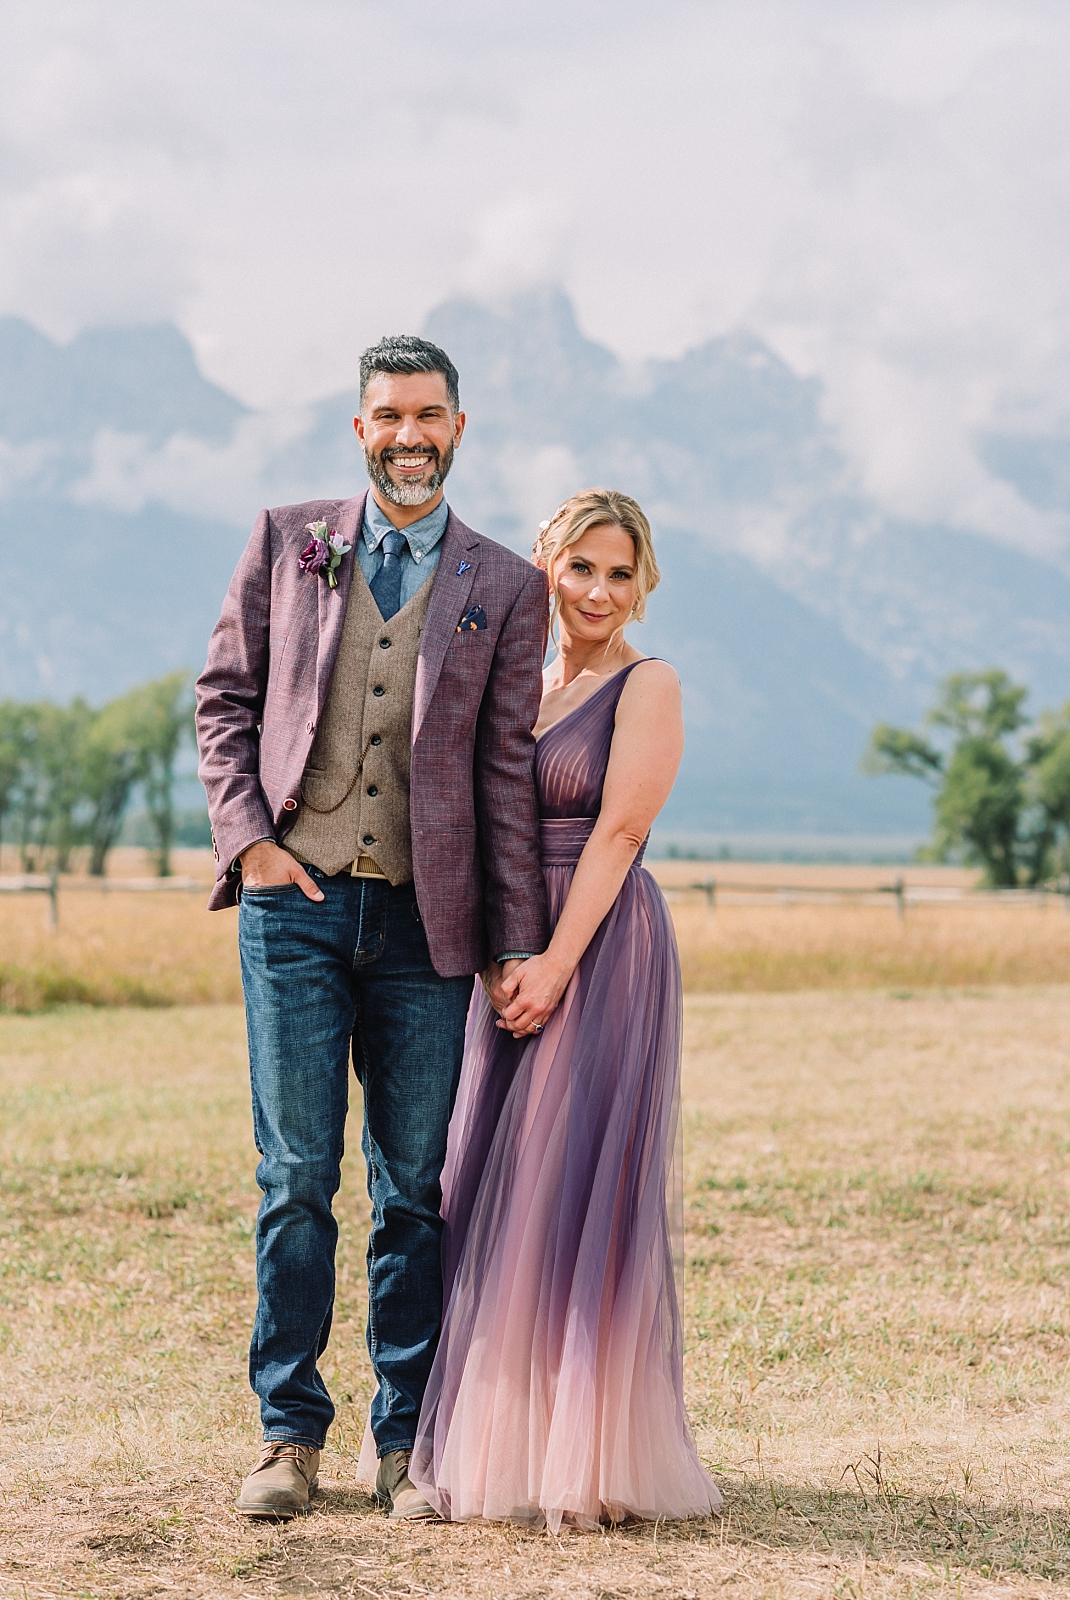 wedding portraits in jackson hole, teton elopement packages, outdoor wedding photography